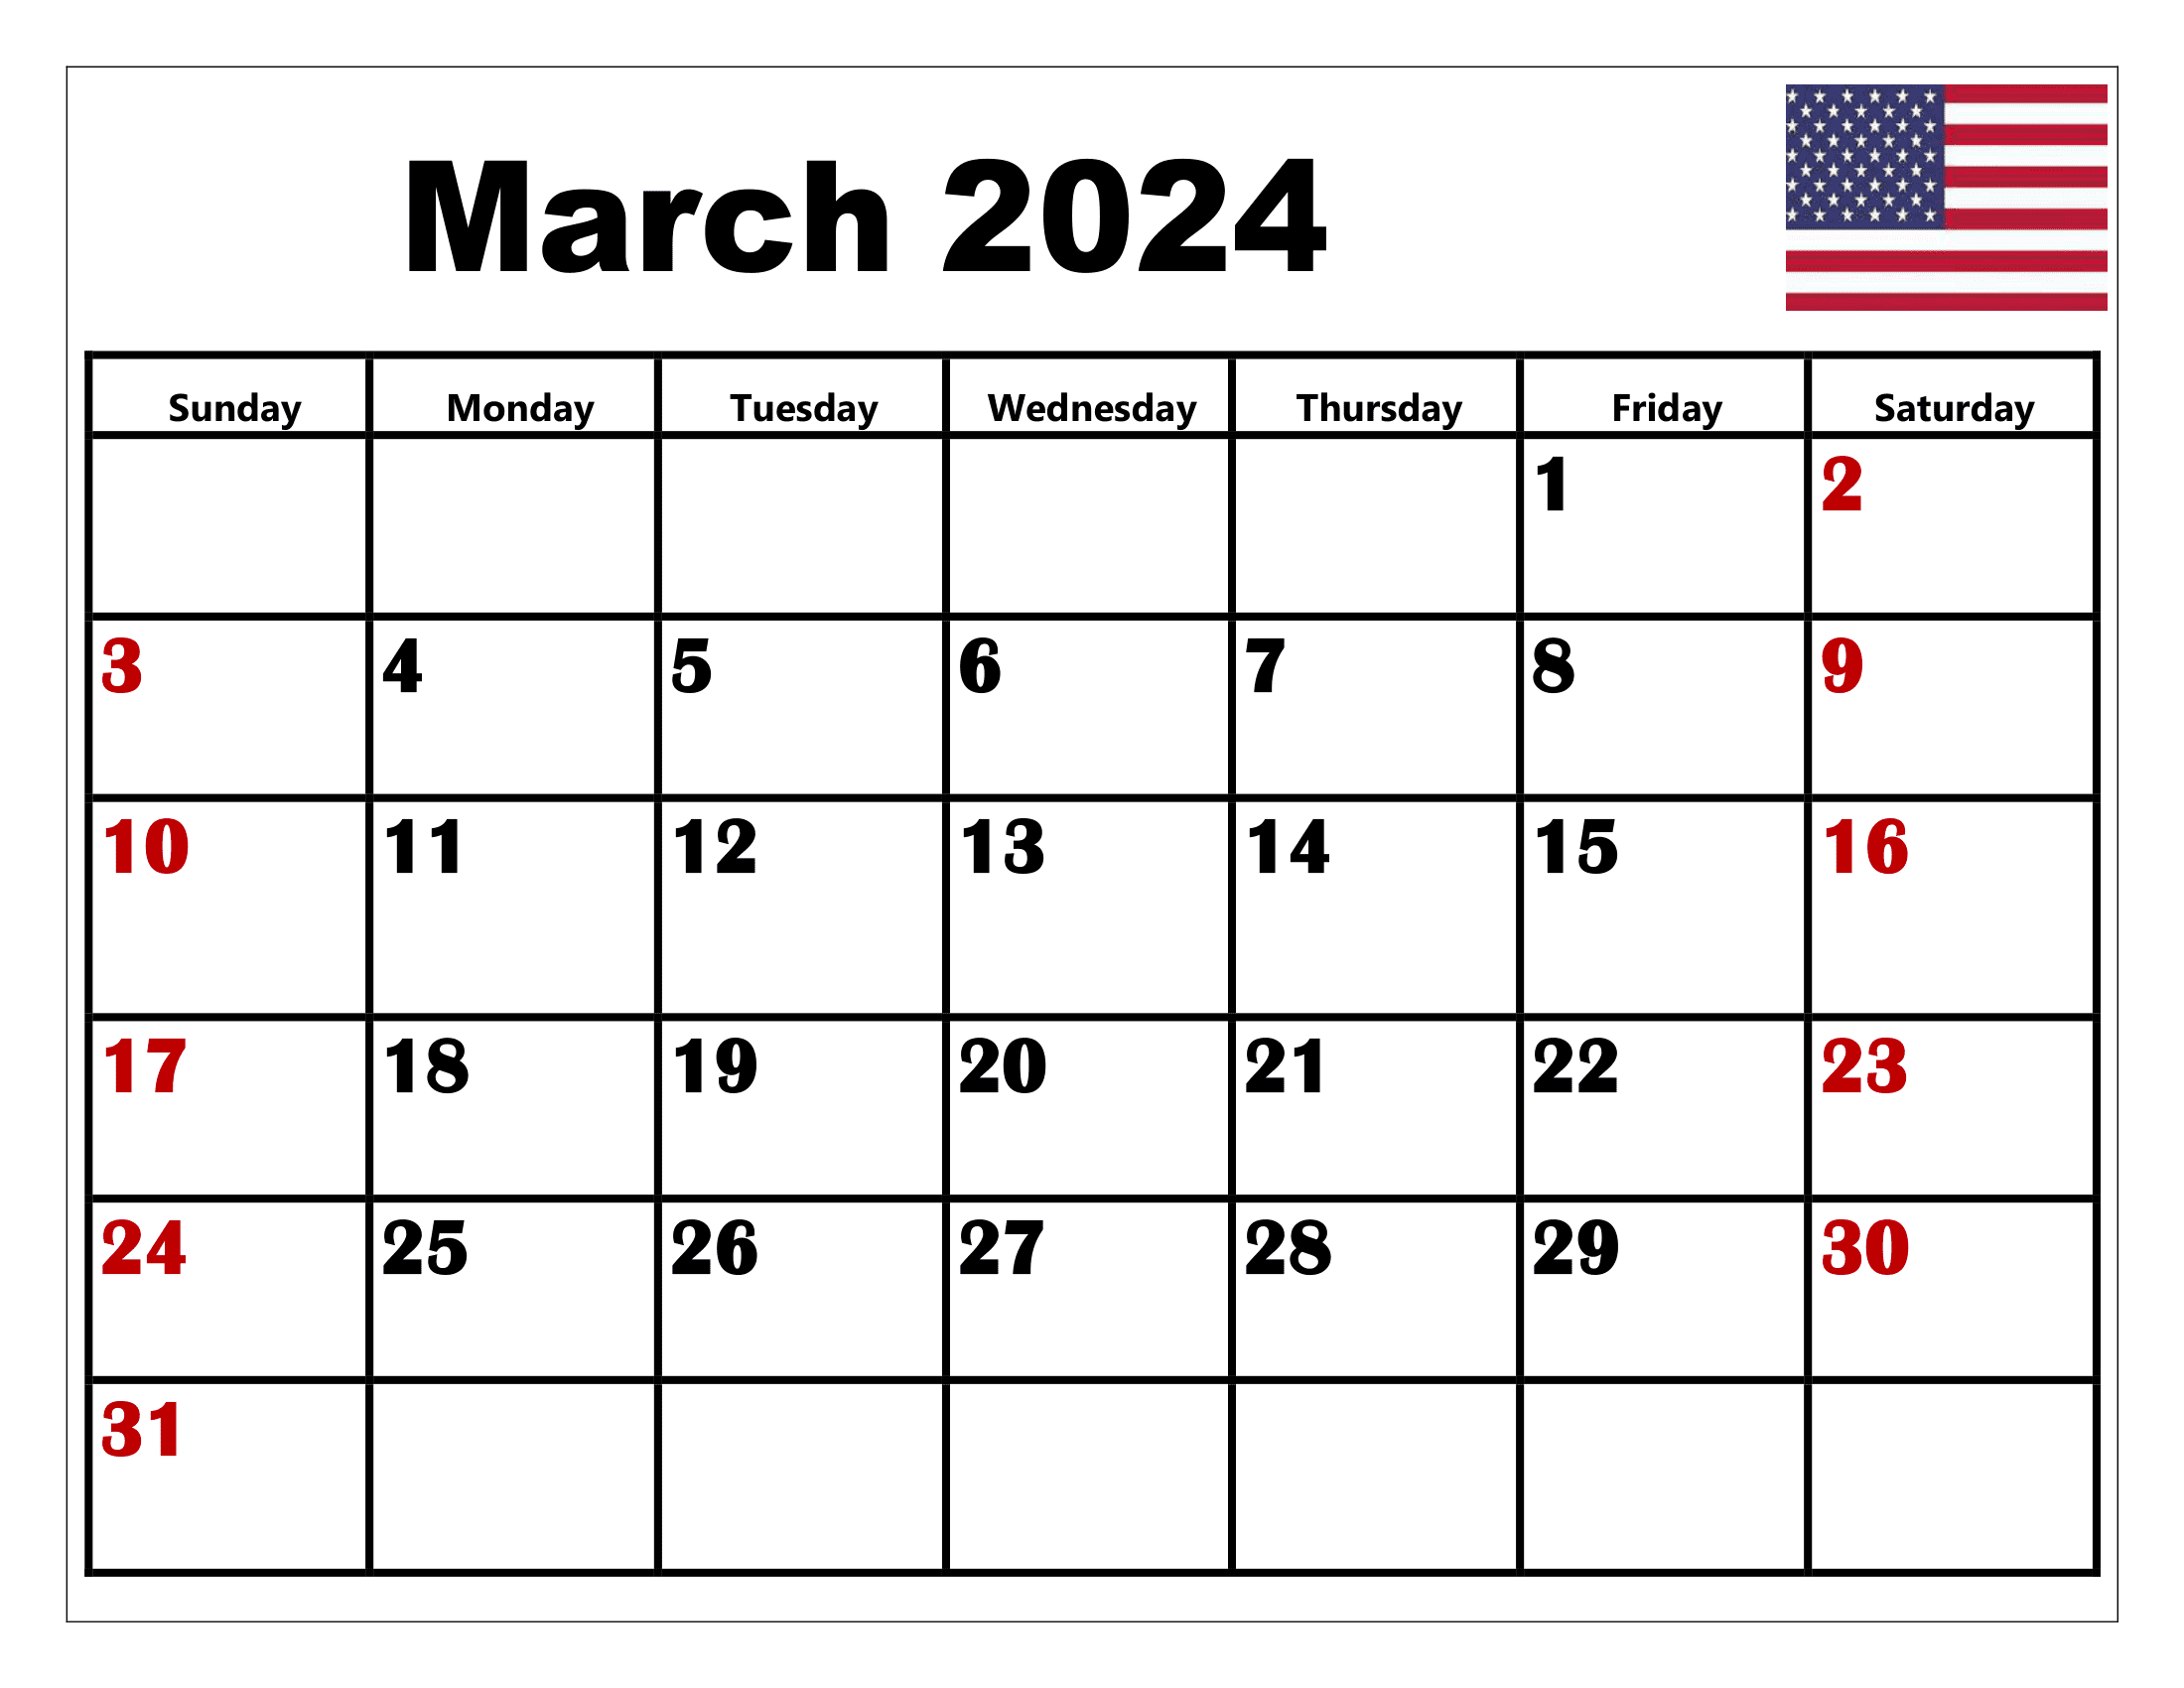 March 2024 Calendar Printable Pdf With Holidays Template Free for March 2024 Calendar Printable With Holidays